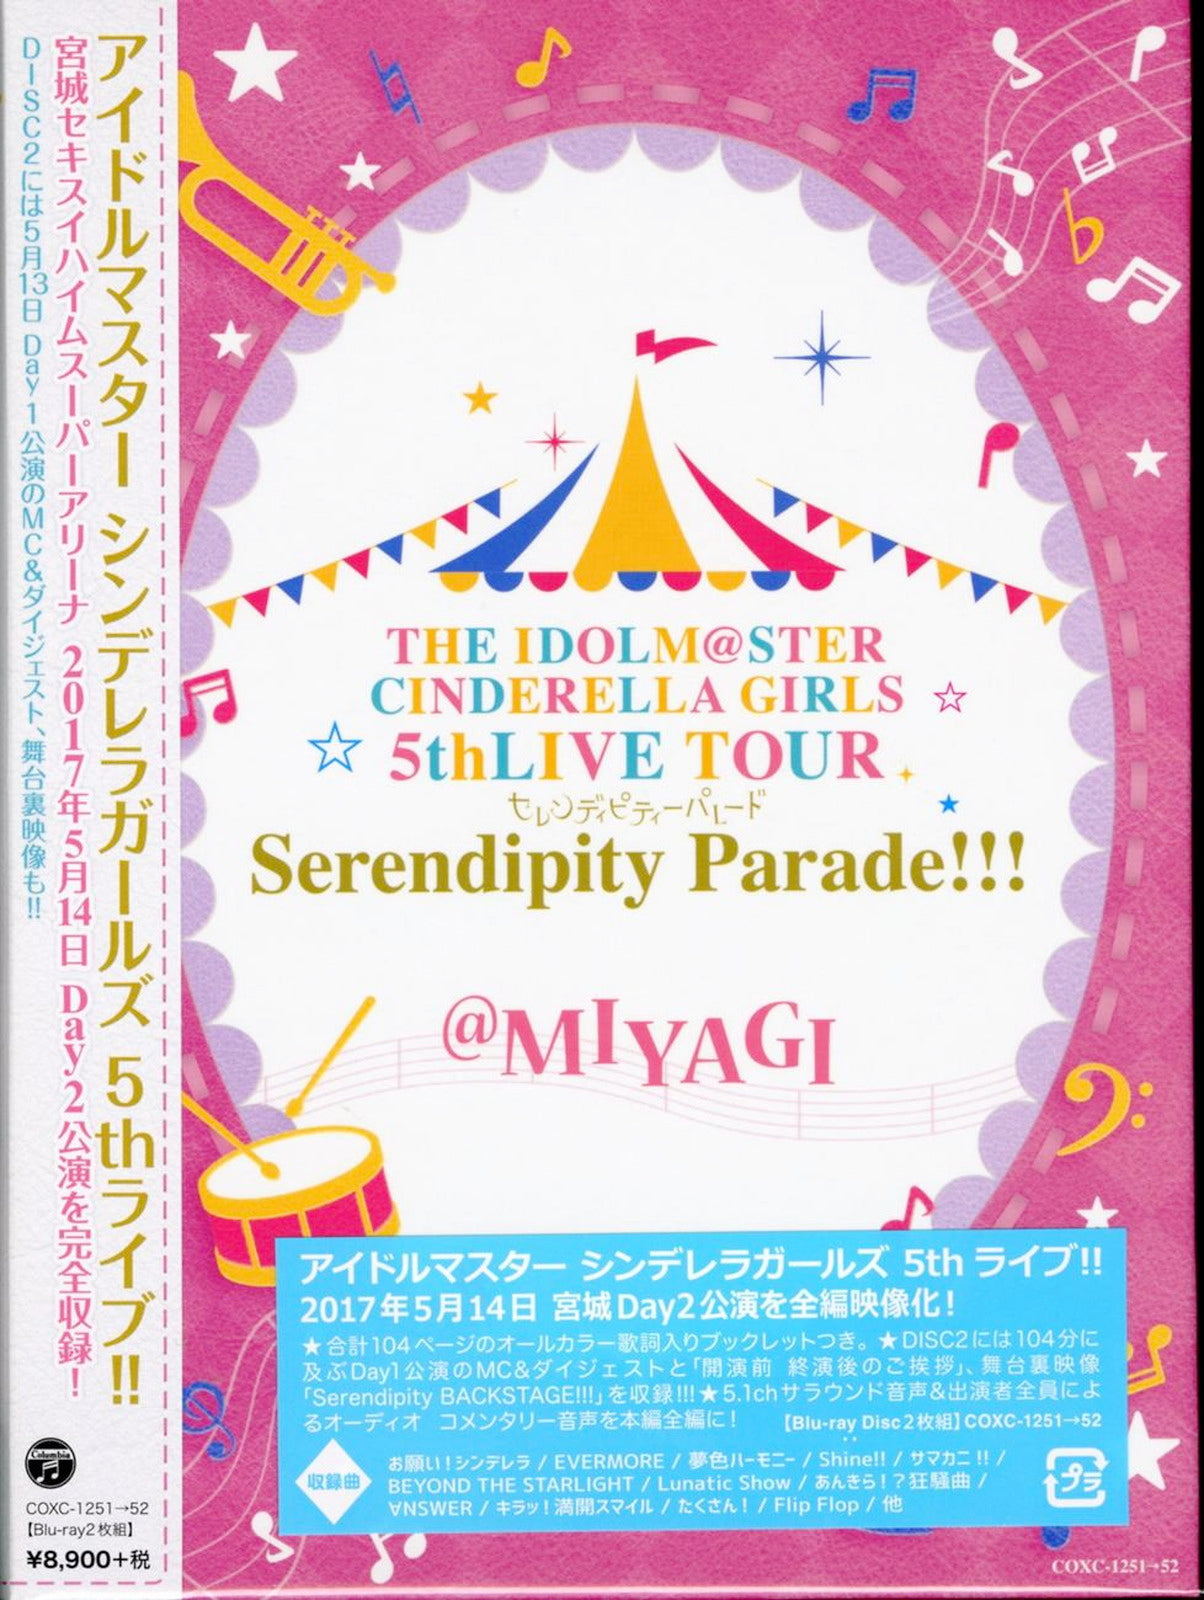 Animation - THE IDOLM@STER CINDERELLA GIRLS 5thLIVE TOUR